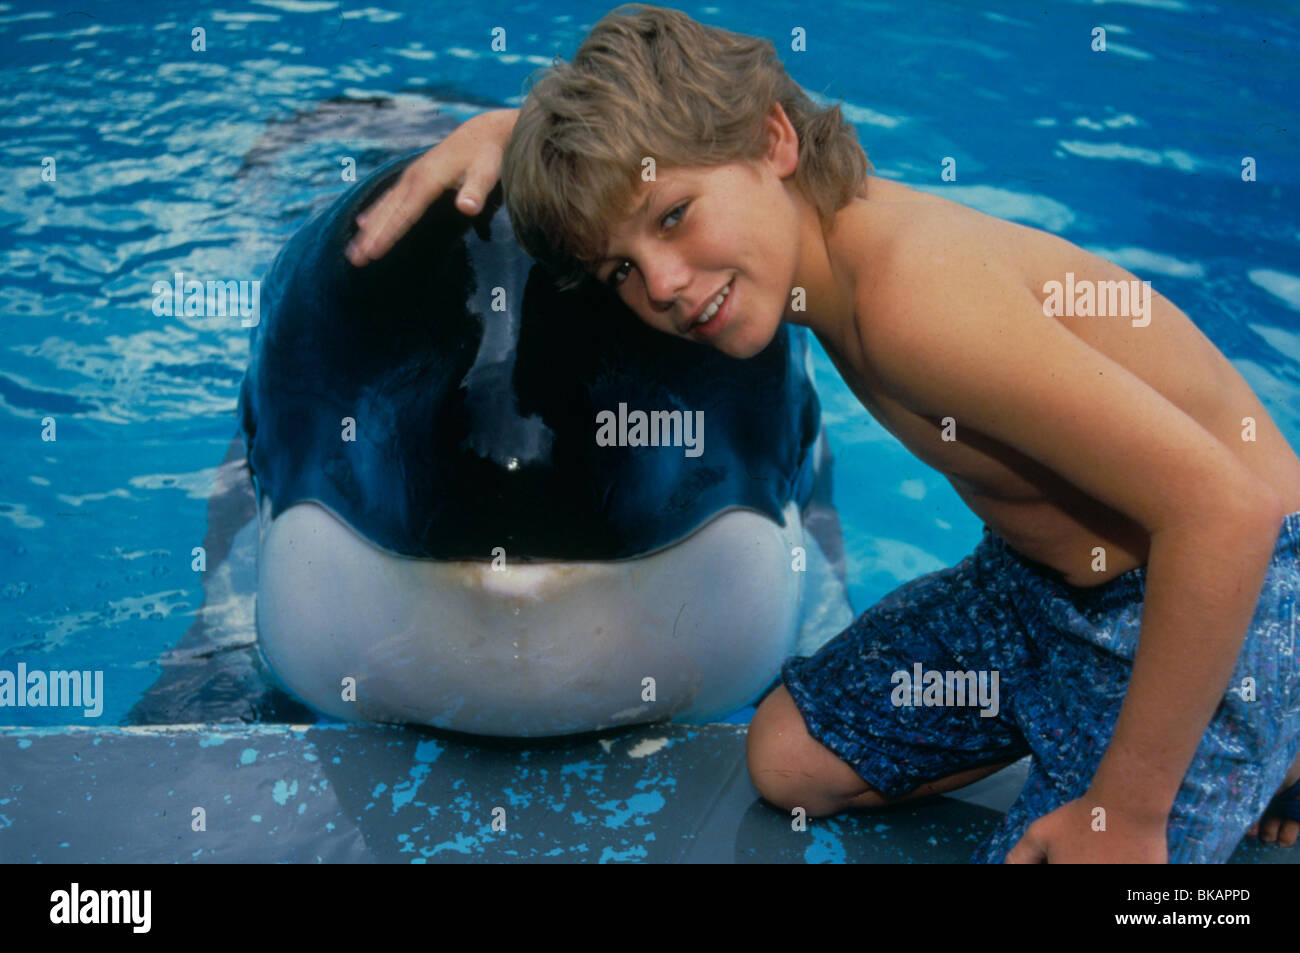 FREE WILLY (1993) JASON JAMES RICHTER FWLY 054 MOVIESTORE COLLECTION LTD Stock Photo